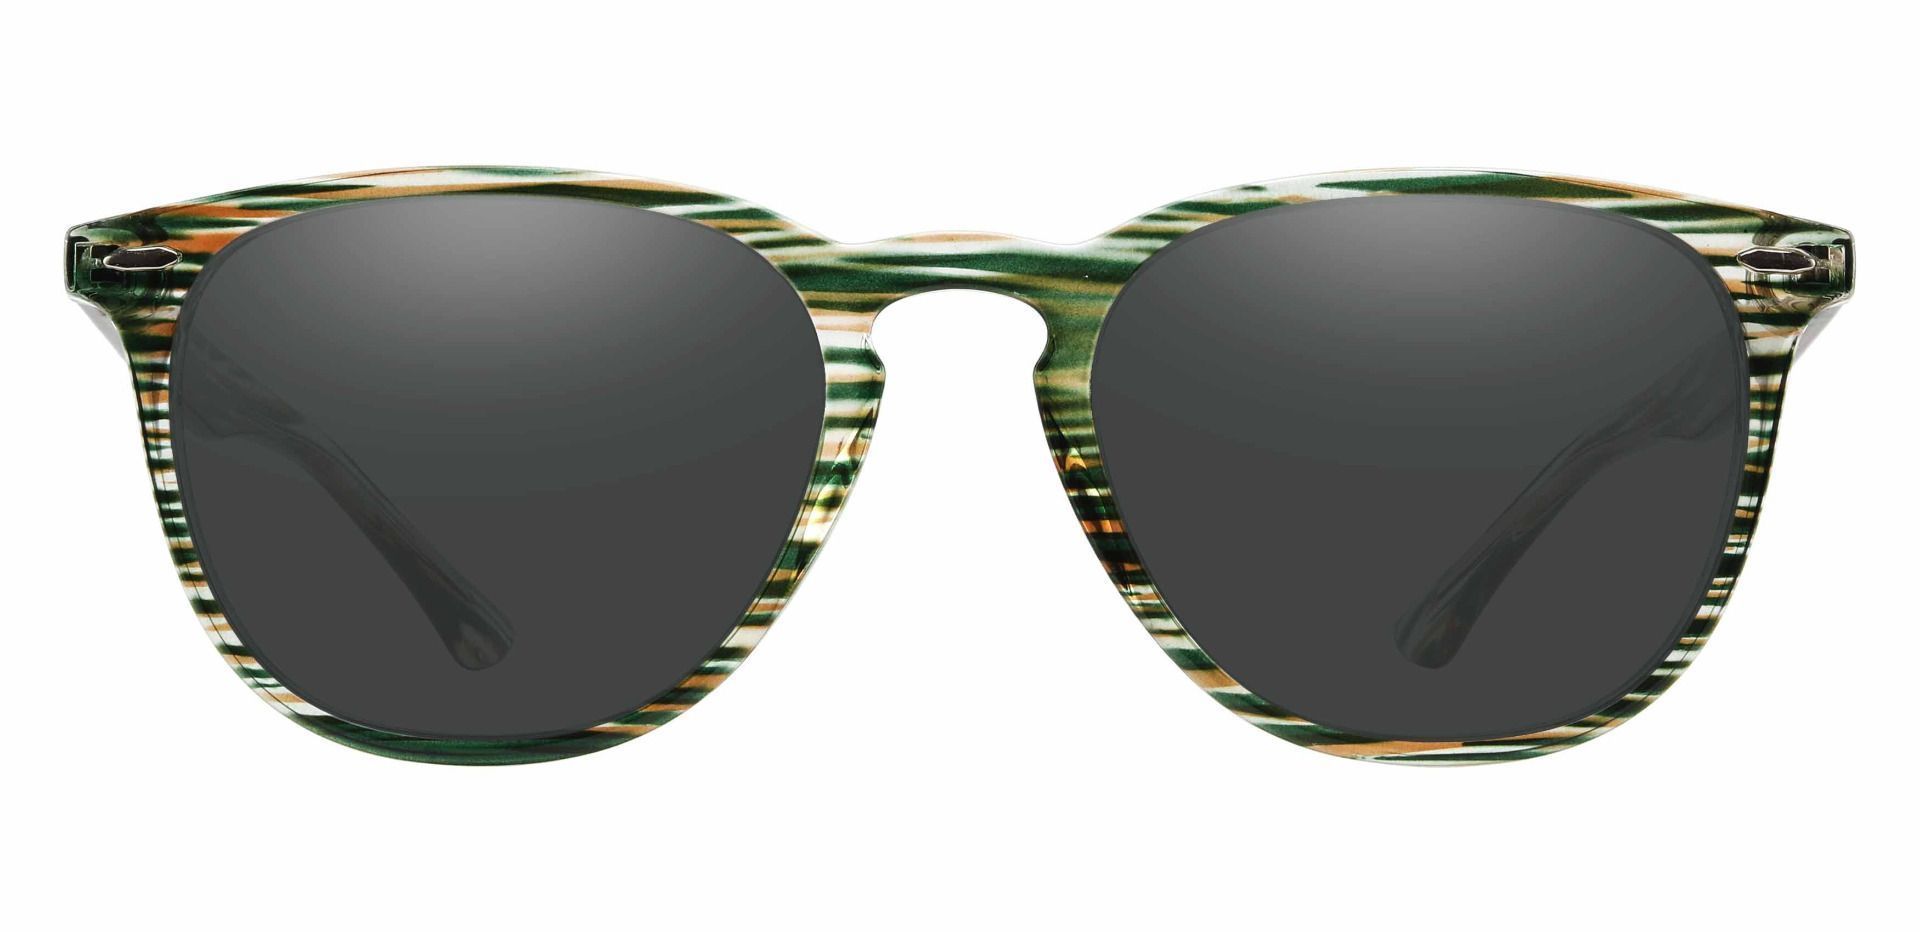 Sycamore Oval Reading Sunglasses - Green Frame With Gray Lenses